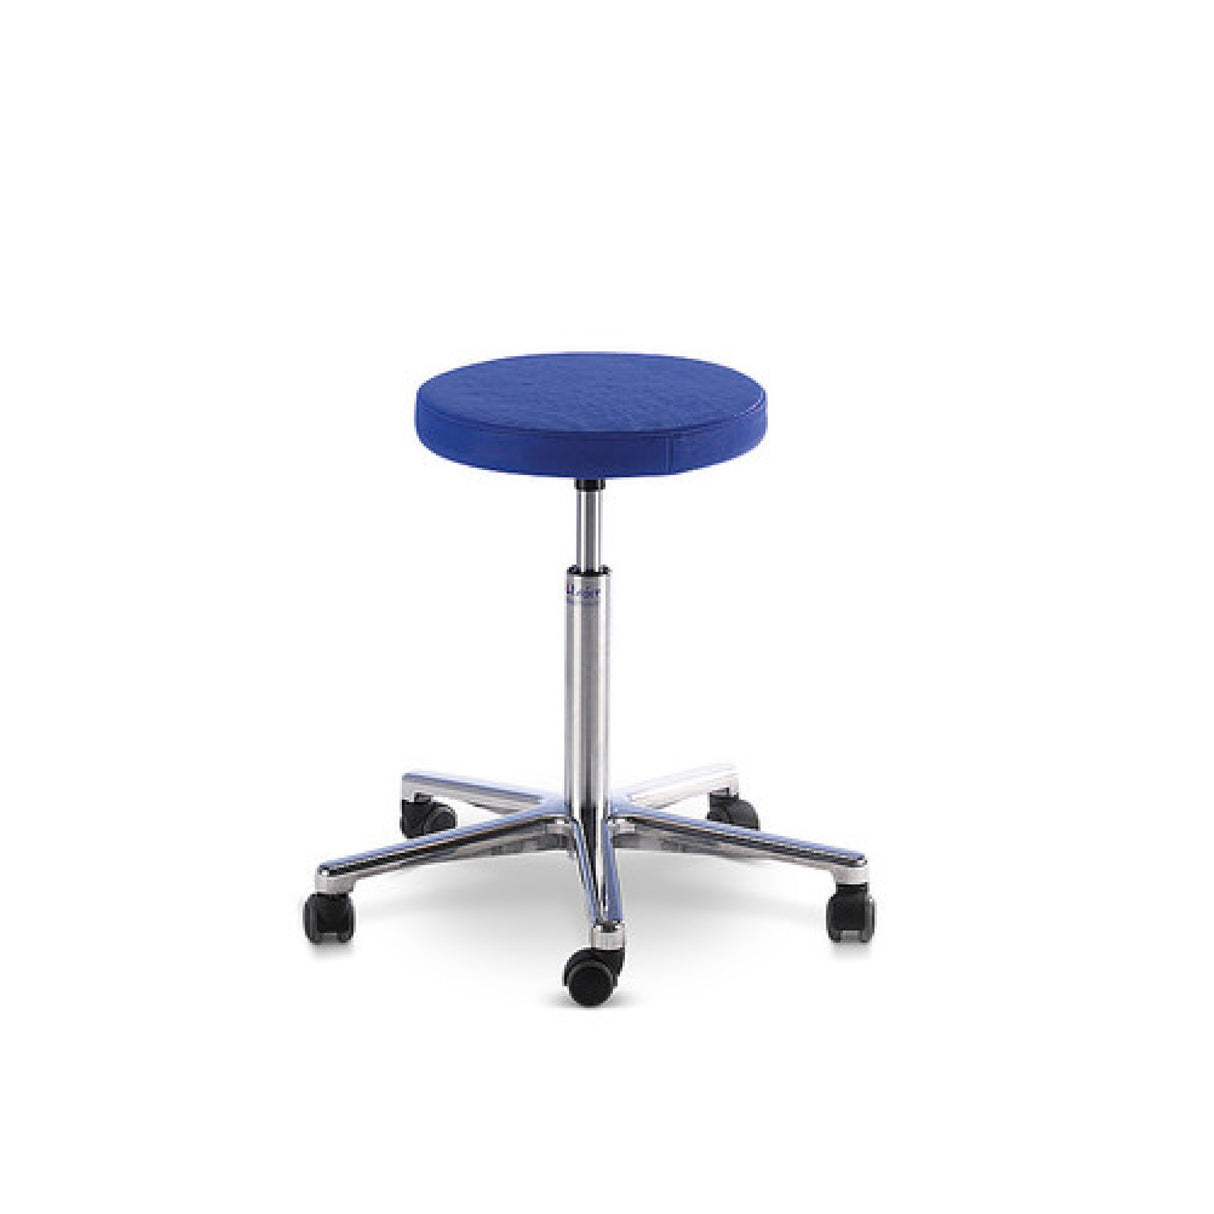 LOJER Round chair